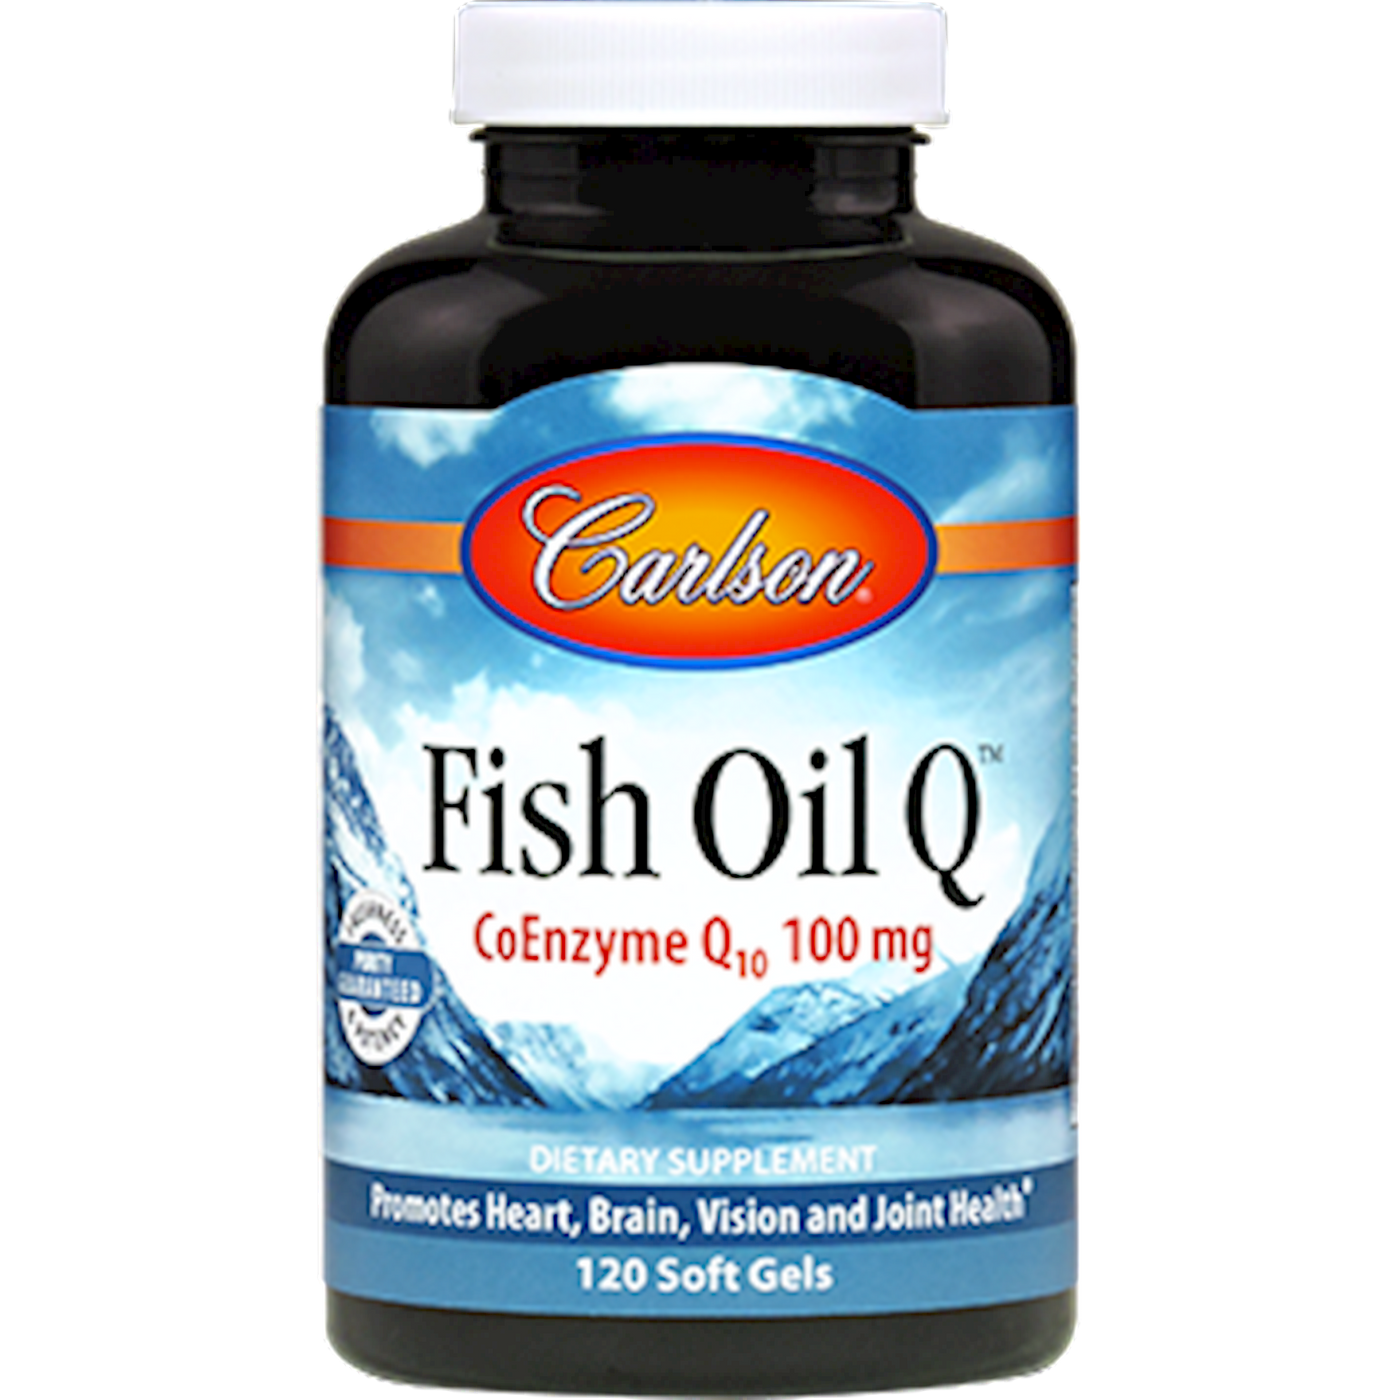 Fish Oil Q  Curated Wellness